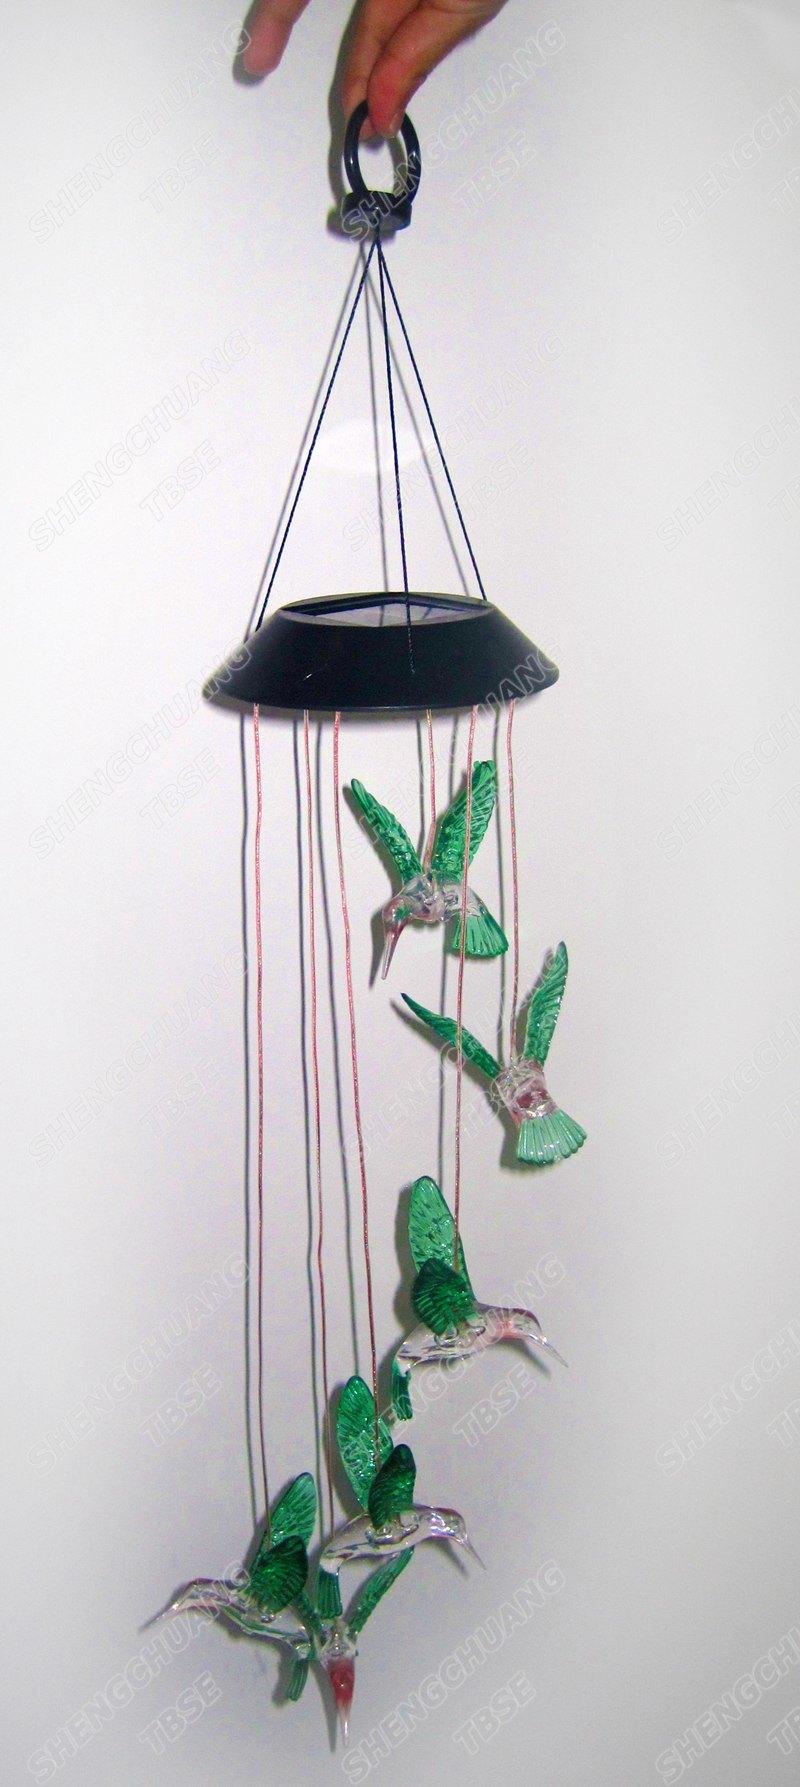 Color Changing Solar LED Wind Chimes Lights with Hummingbirds for Decoration SL-FL-Hb